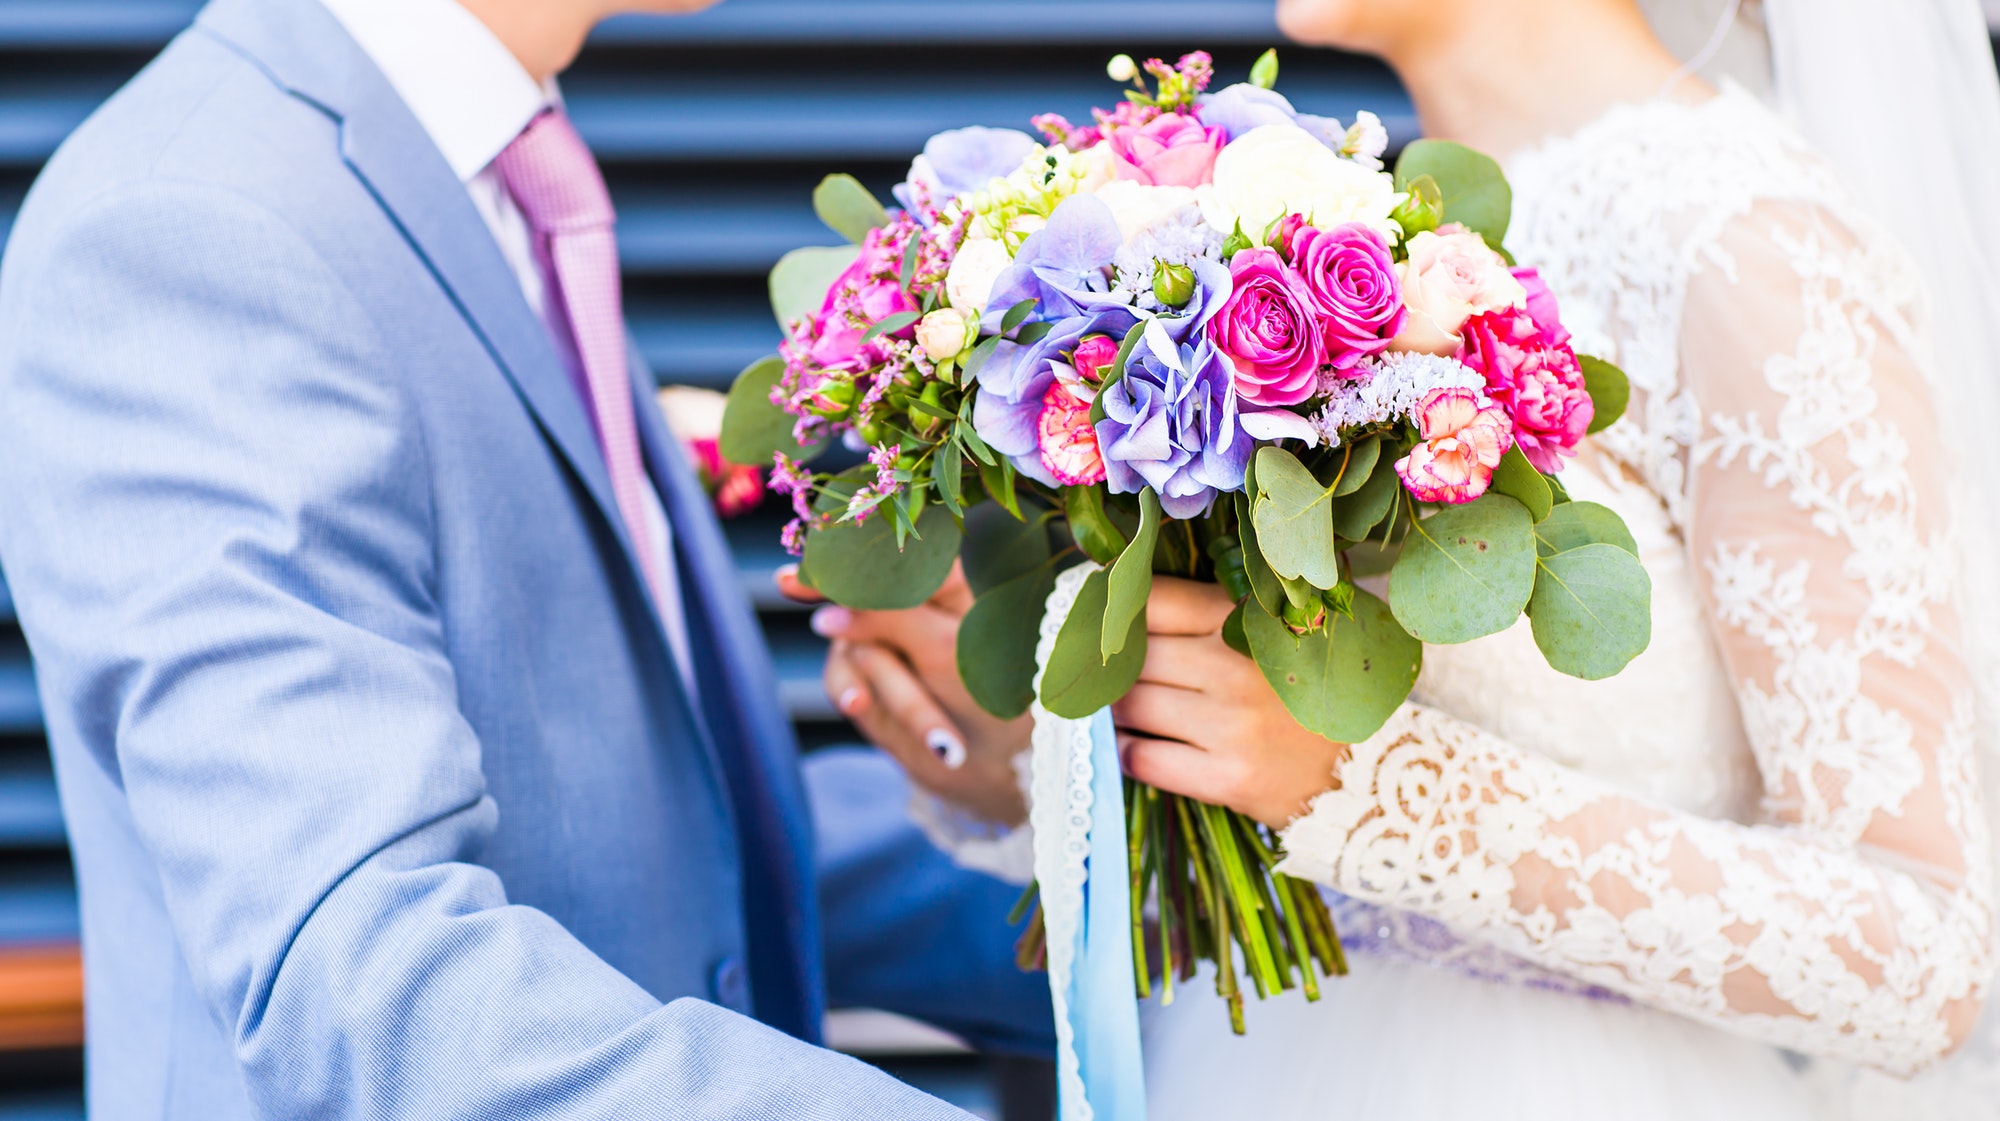 Wedding flowers ,Woman holding colorful bouquet with her hands on wedding day